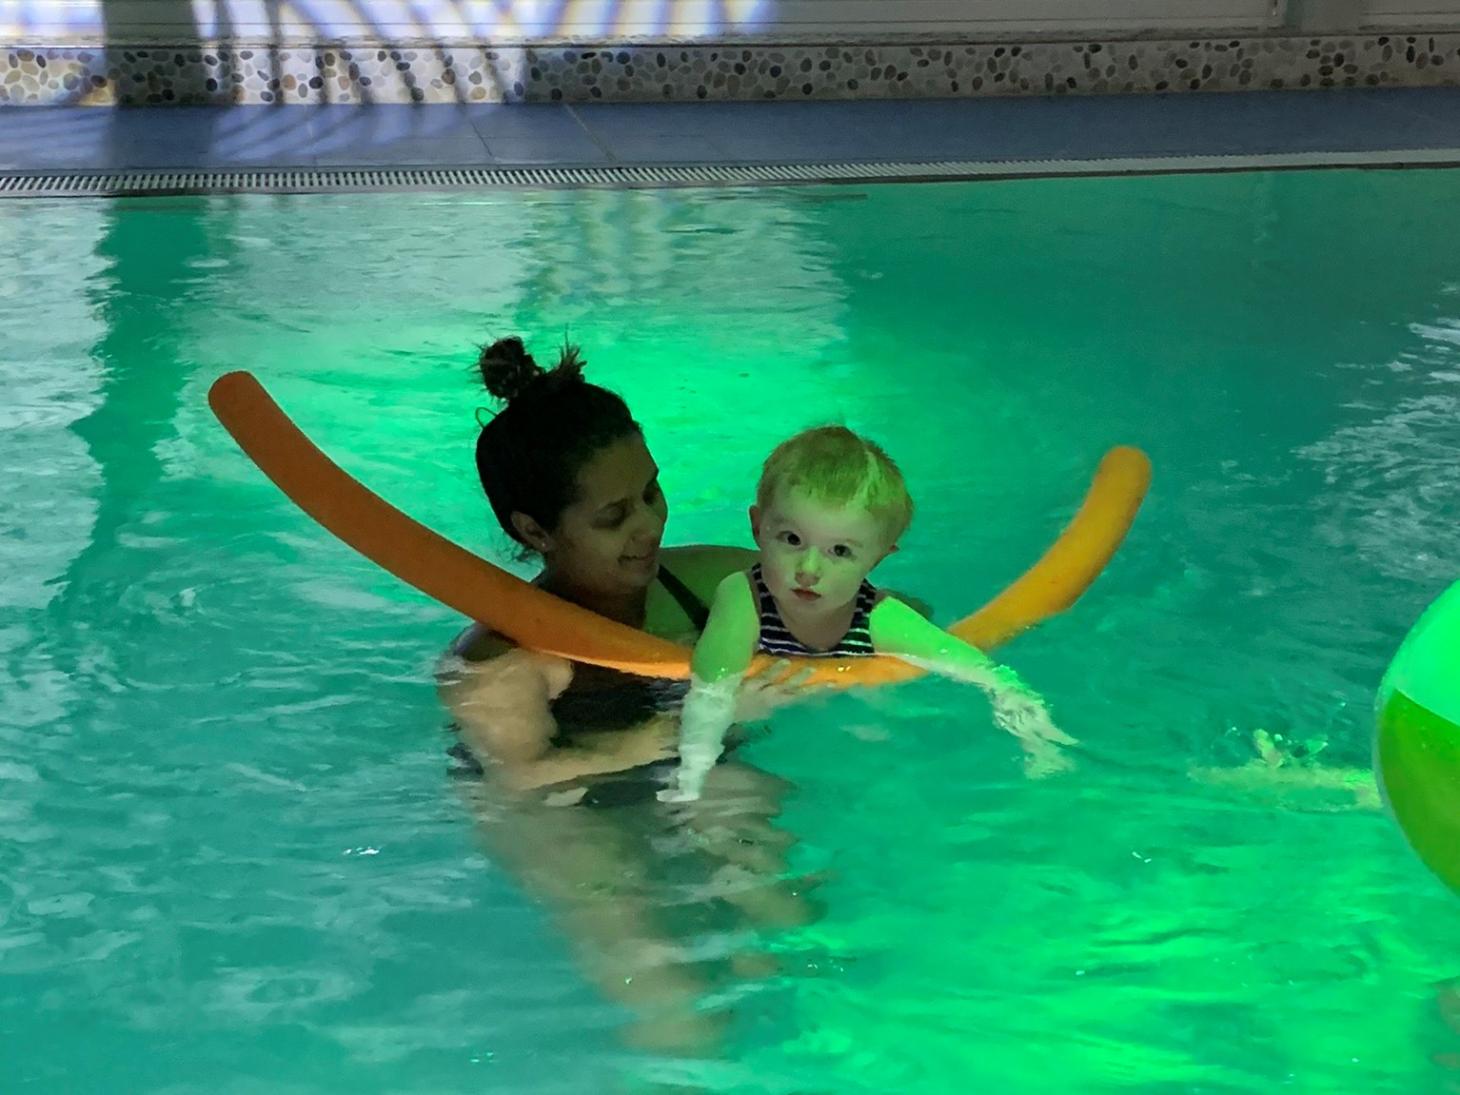 Millie in the pool swimming with the support of a therapist